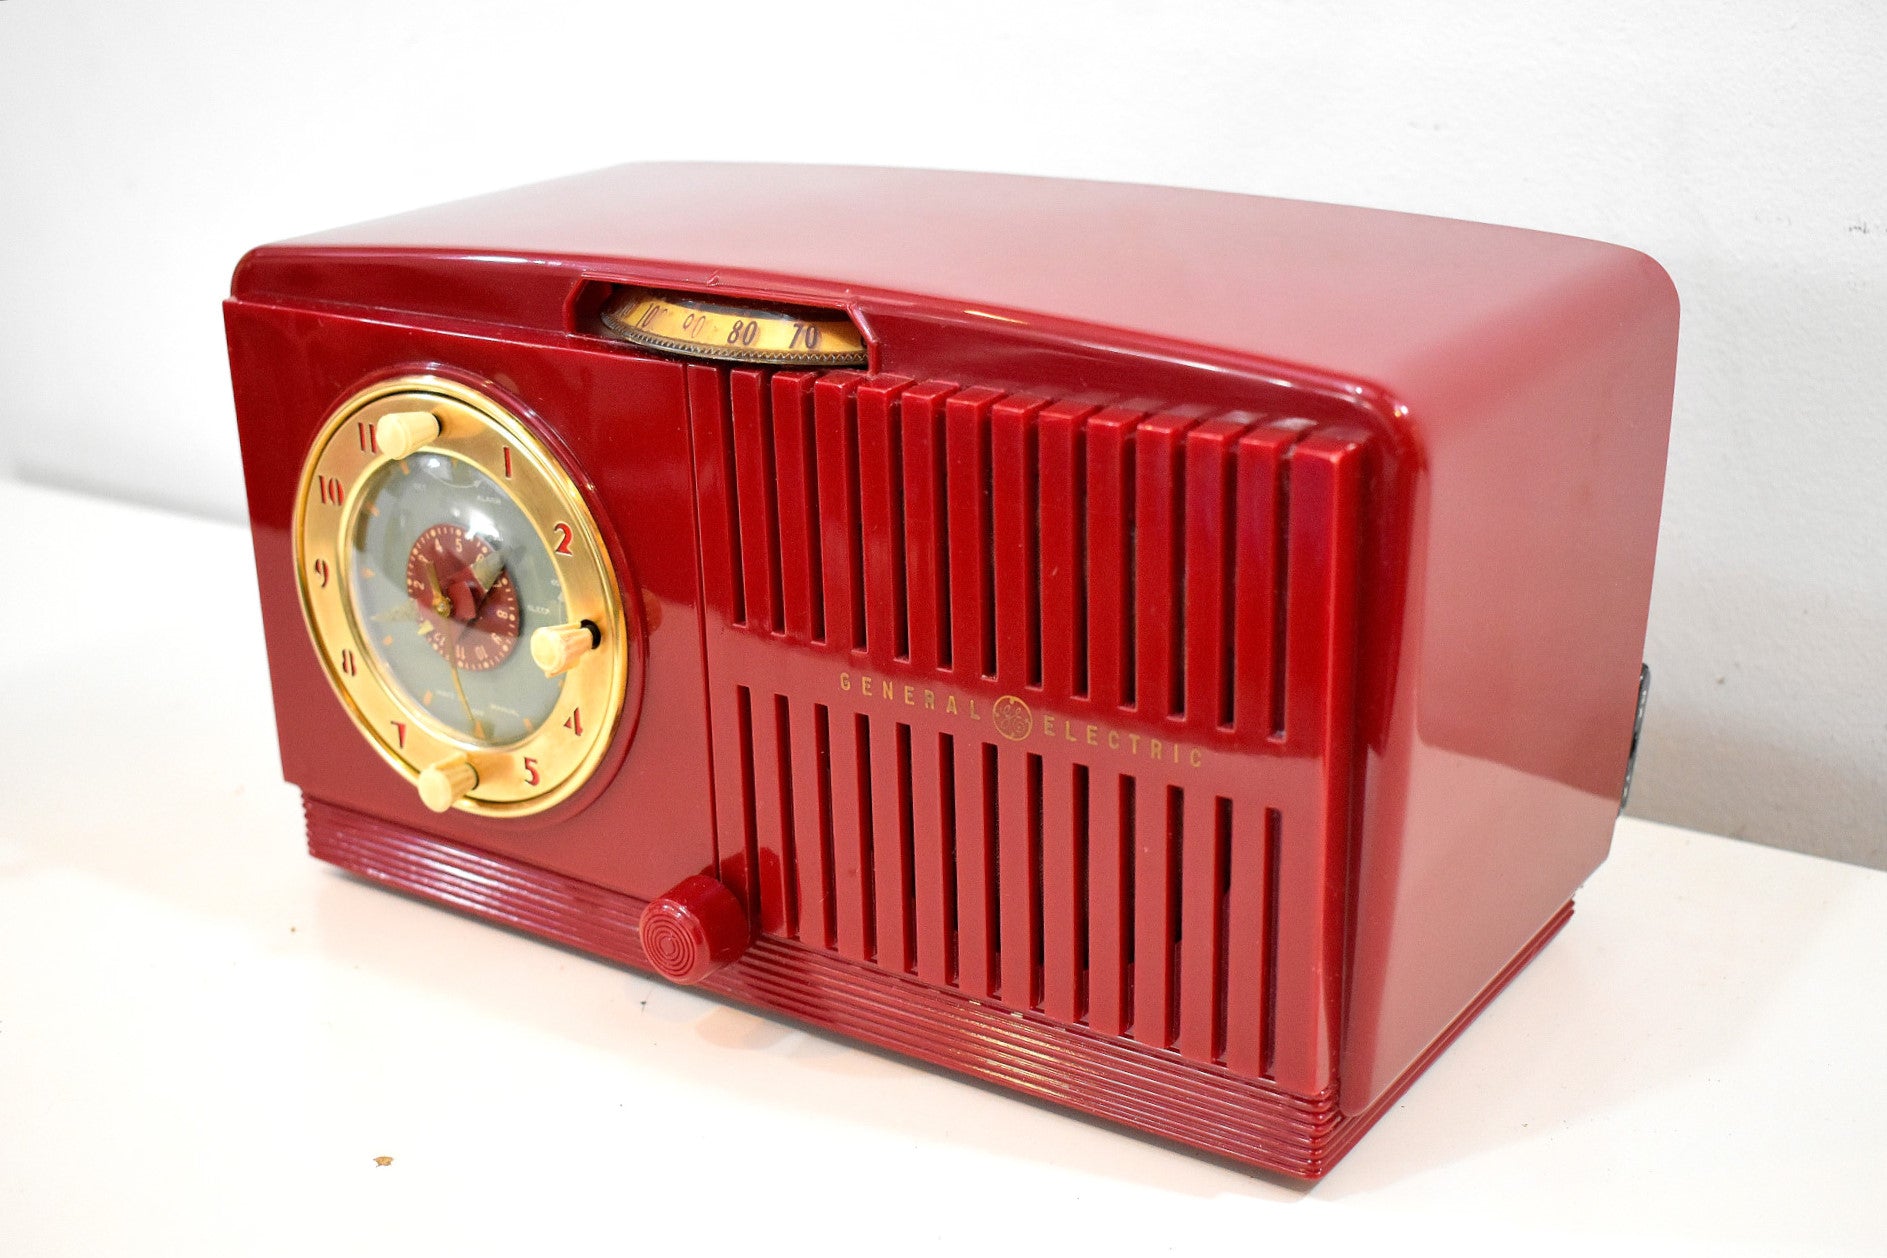 Bluetooth Ready To Go - Cranberry Red 1951 General Electric Model 517 Vacuum Tube AM Radio Sounds Great! Looks Great!